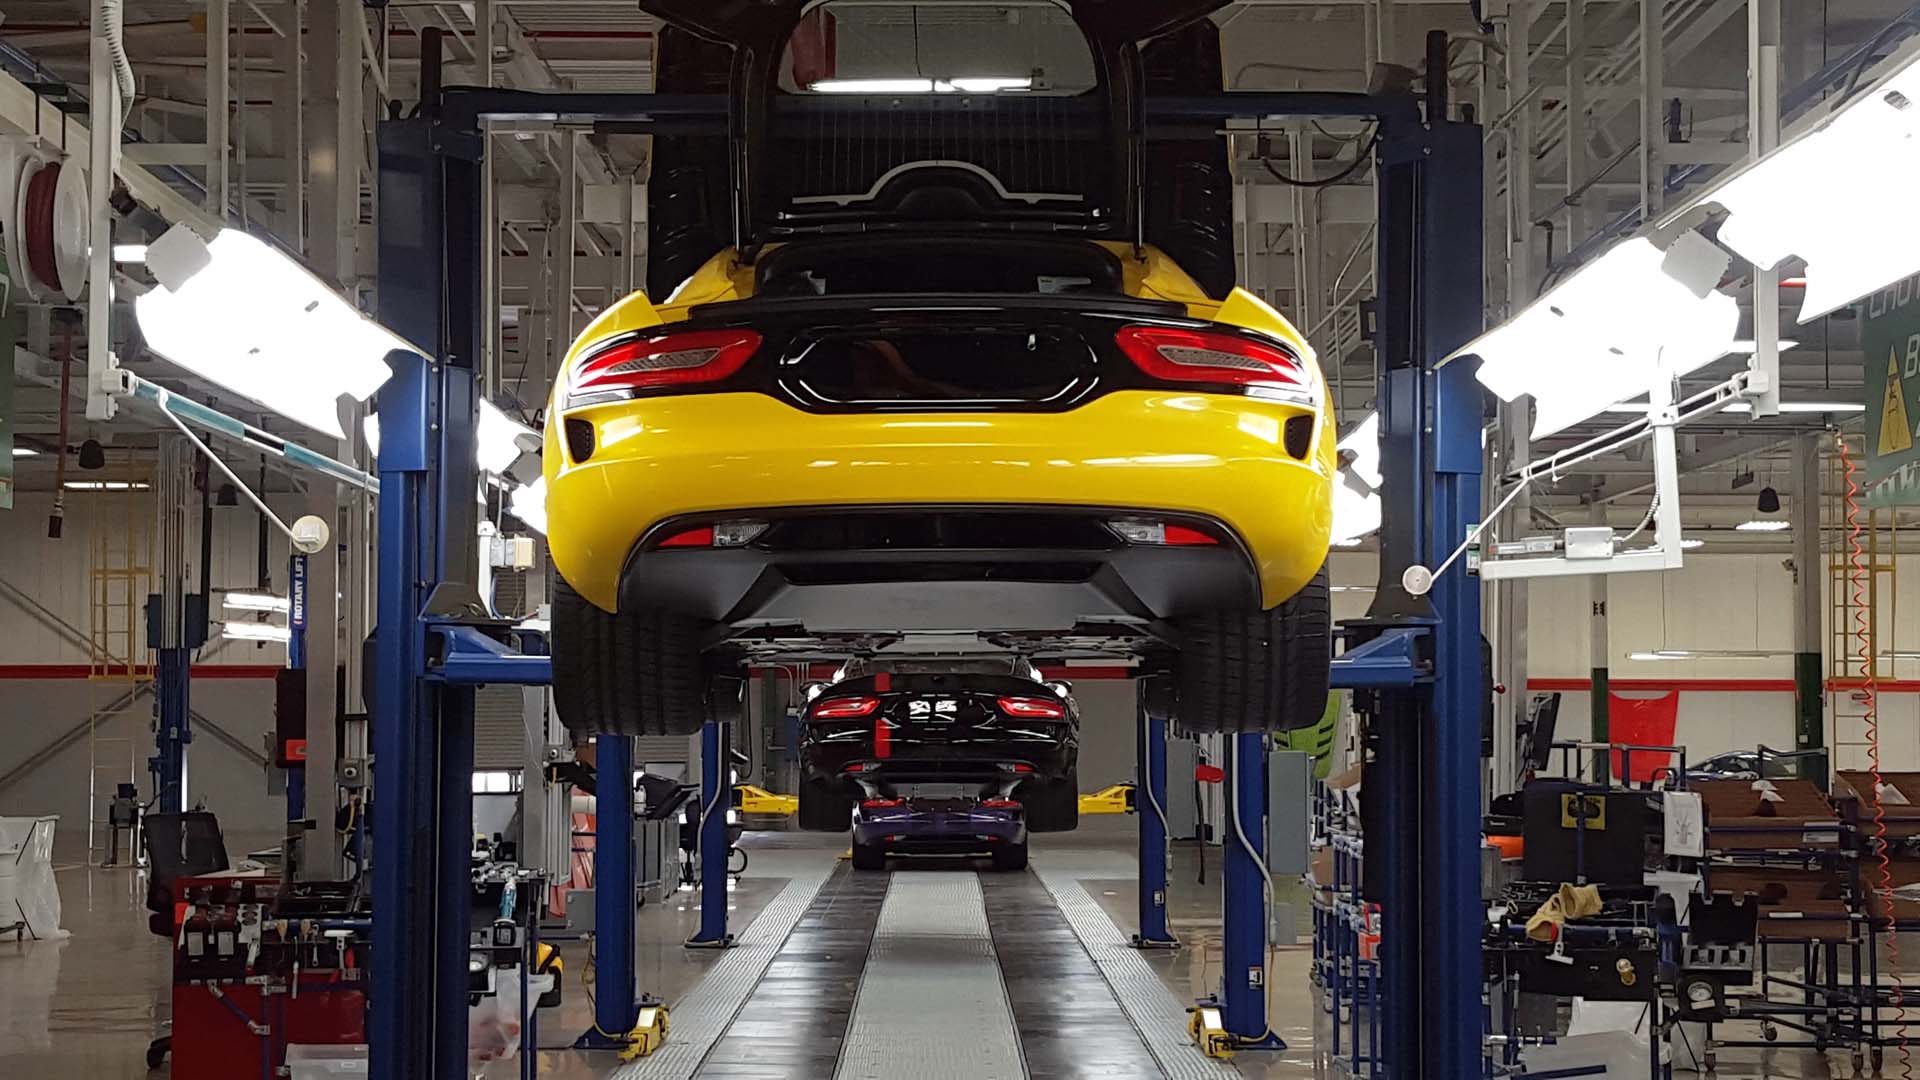 At present, Conner Avenue Assembly is producing just 3 Dodge Vipers per day. In this photo, a full day’s worth of production waits for finishing touches on the assembly line. The plant can build up to 12 cars per day, when required. Each car is hand-assembled and uniquely finished to its owner’s individual tastes.